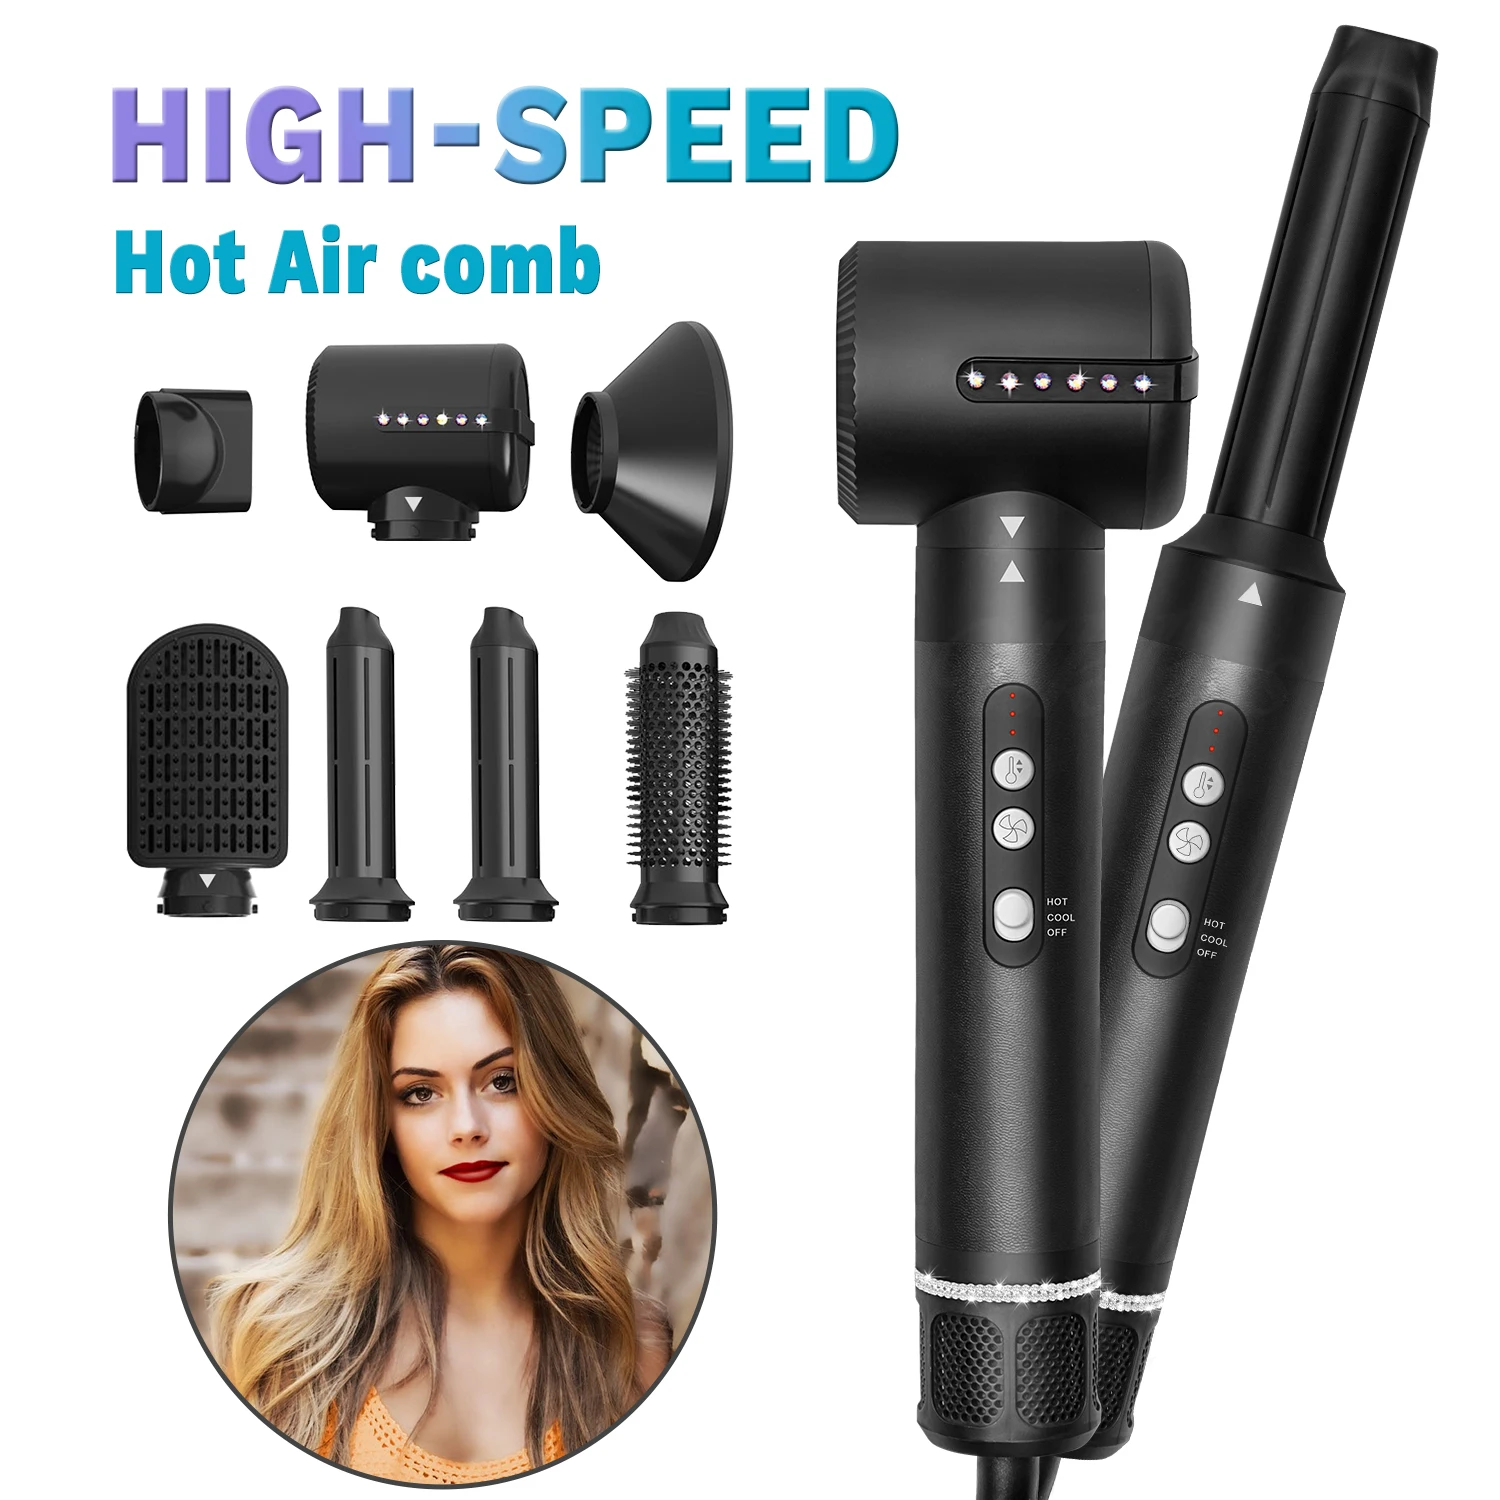 

Brushless Hair Dryer 7 In 1 Hot Air Brush Styler Professional High Speed Hair Dryers Negative Ionic Blow Dryer Comb Curling Iron